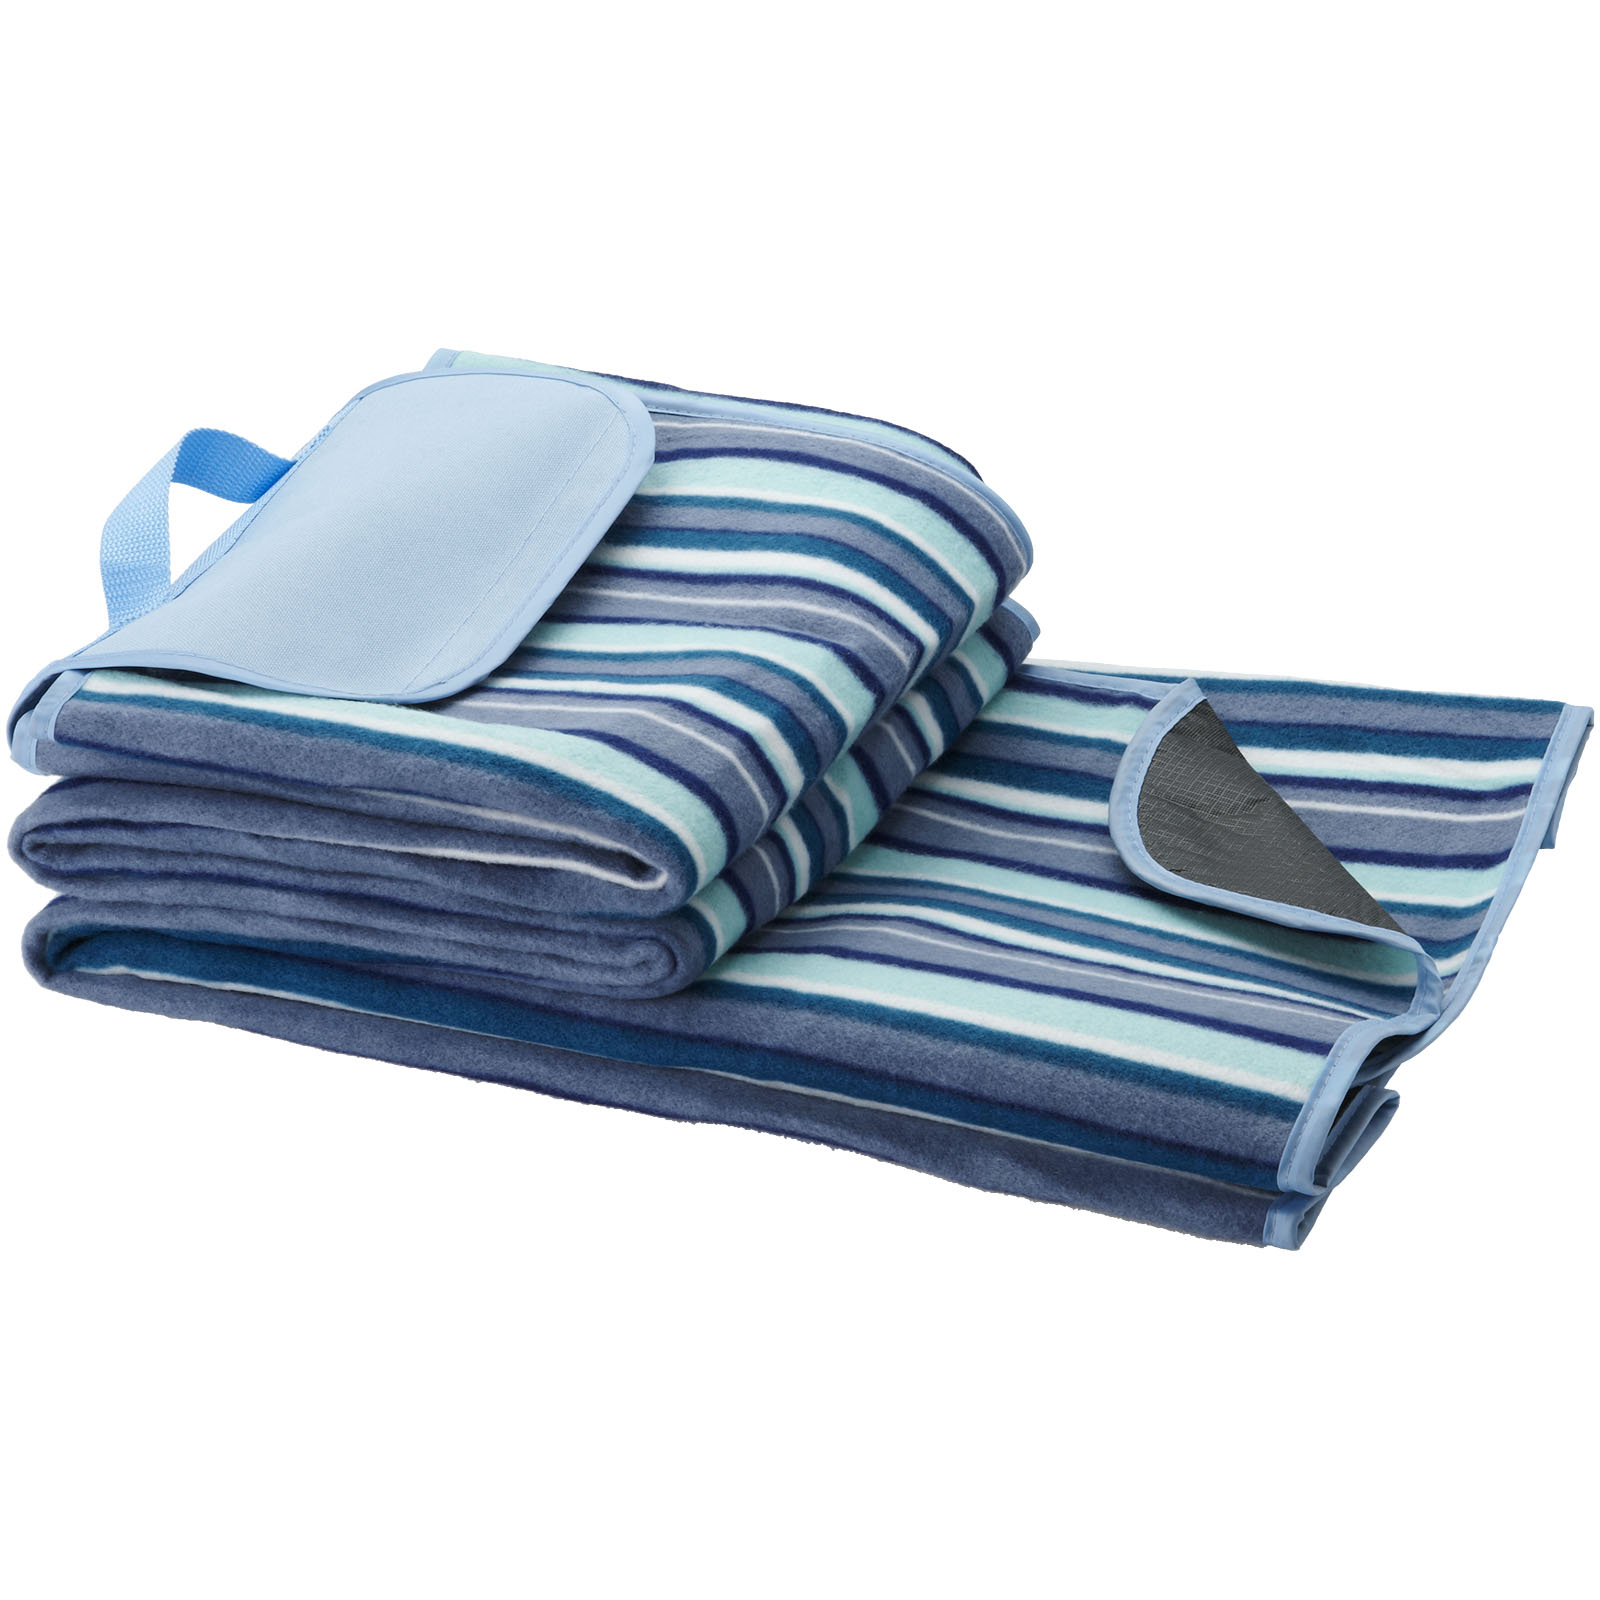 Picnic Accessories - Riviera water-resistant outdoor picnic blanket